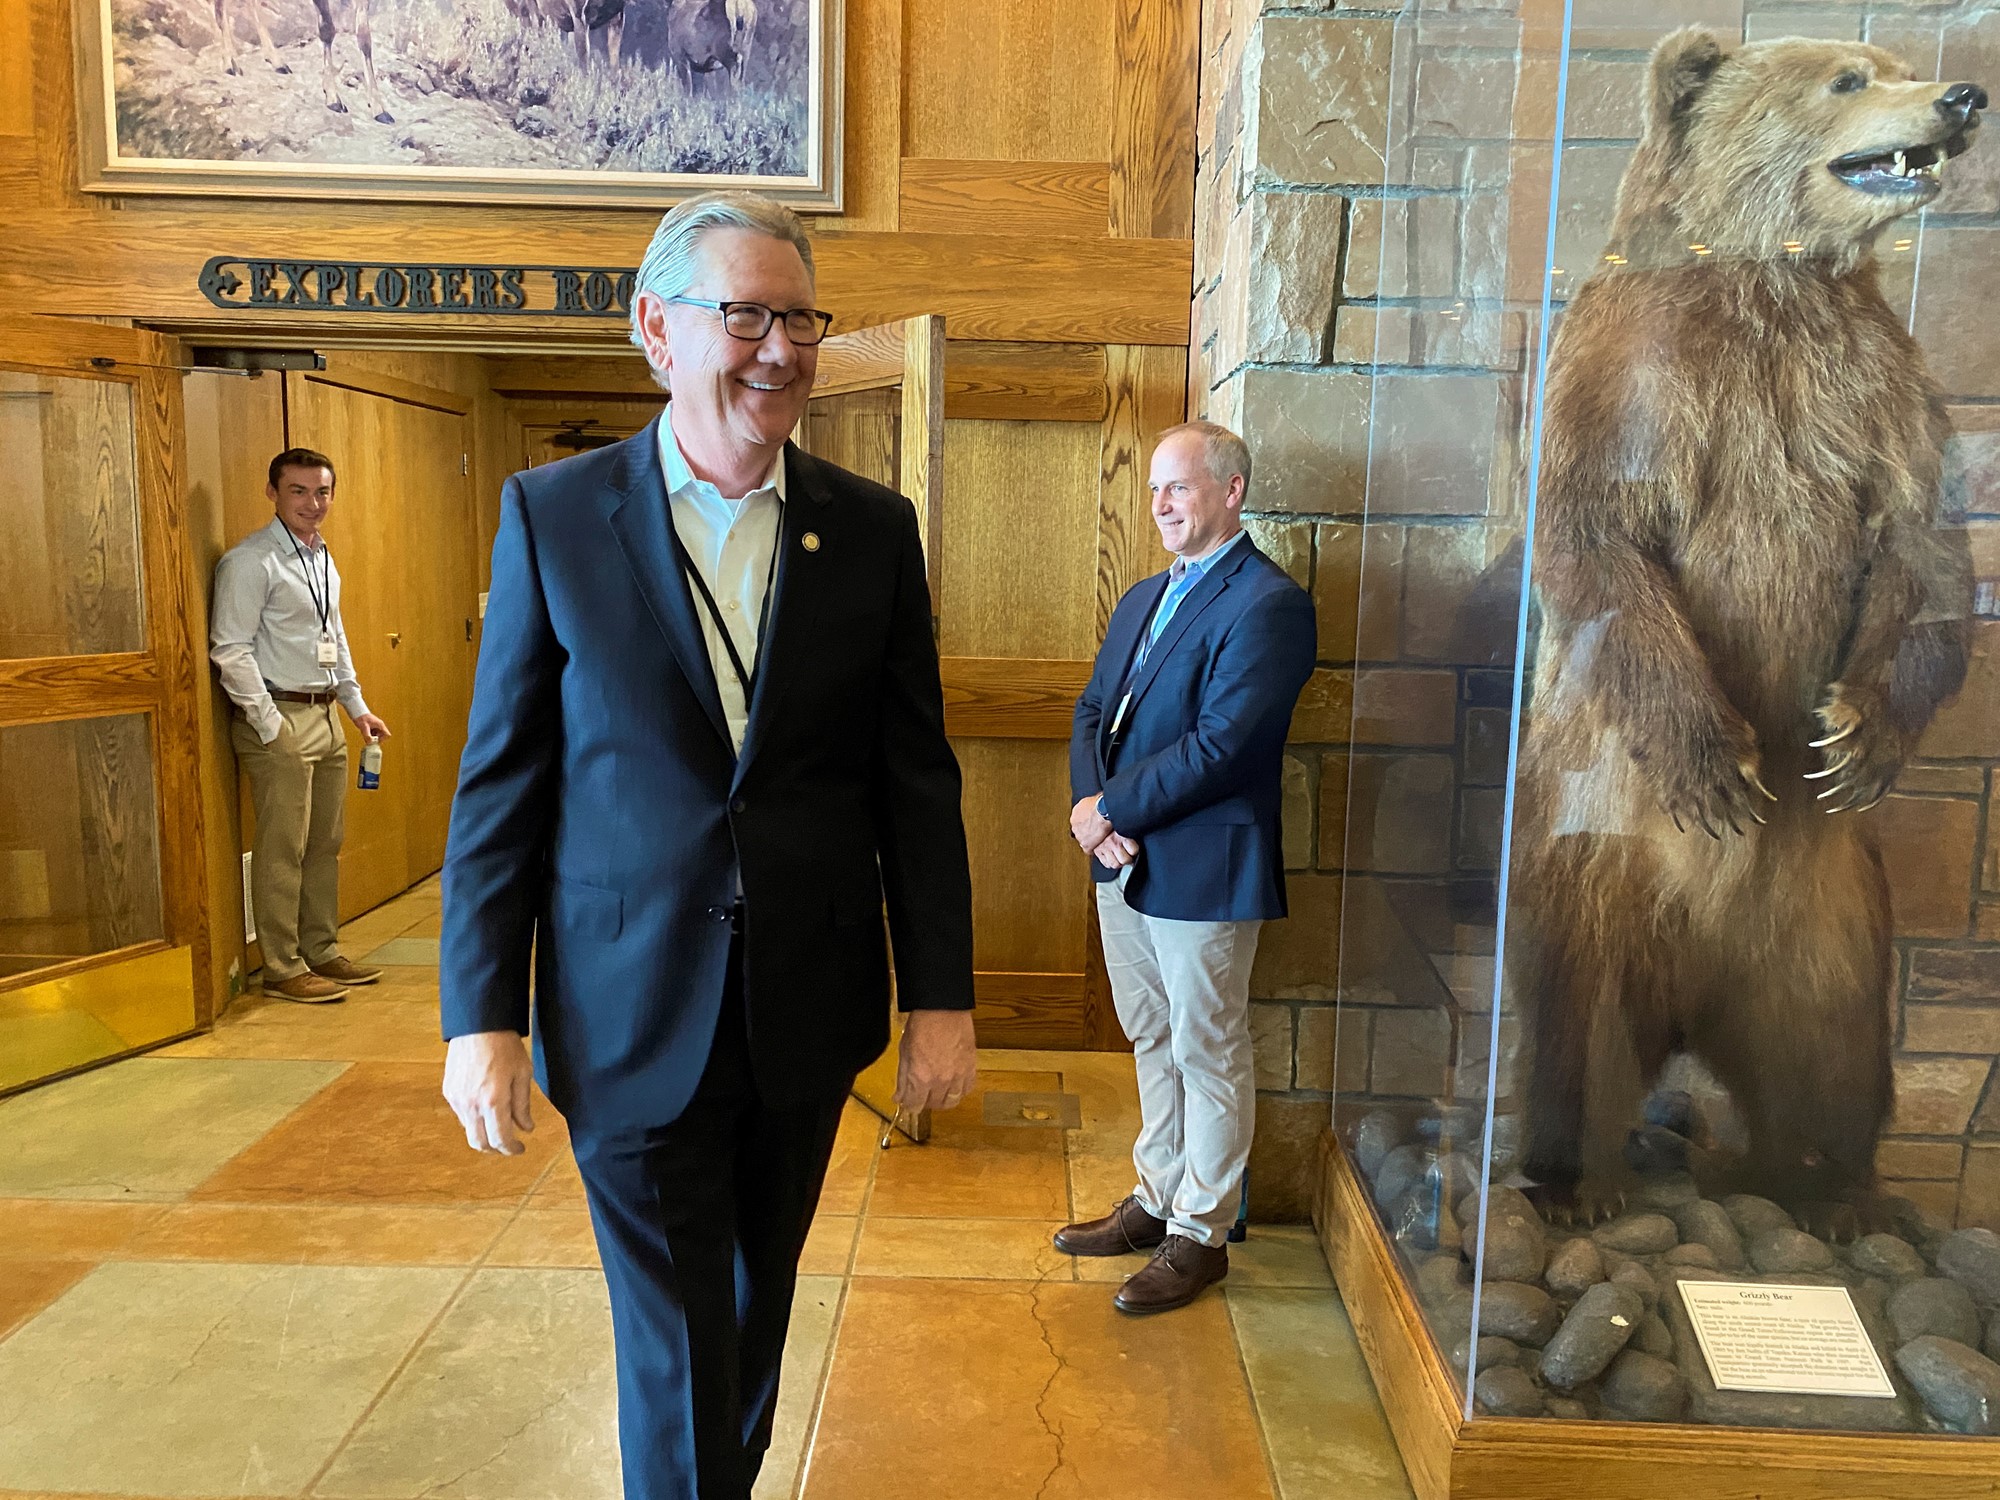 A man walks past a taxidermied grizzly bear in a glass case.